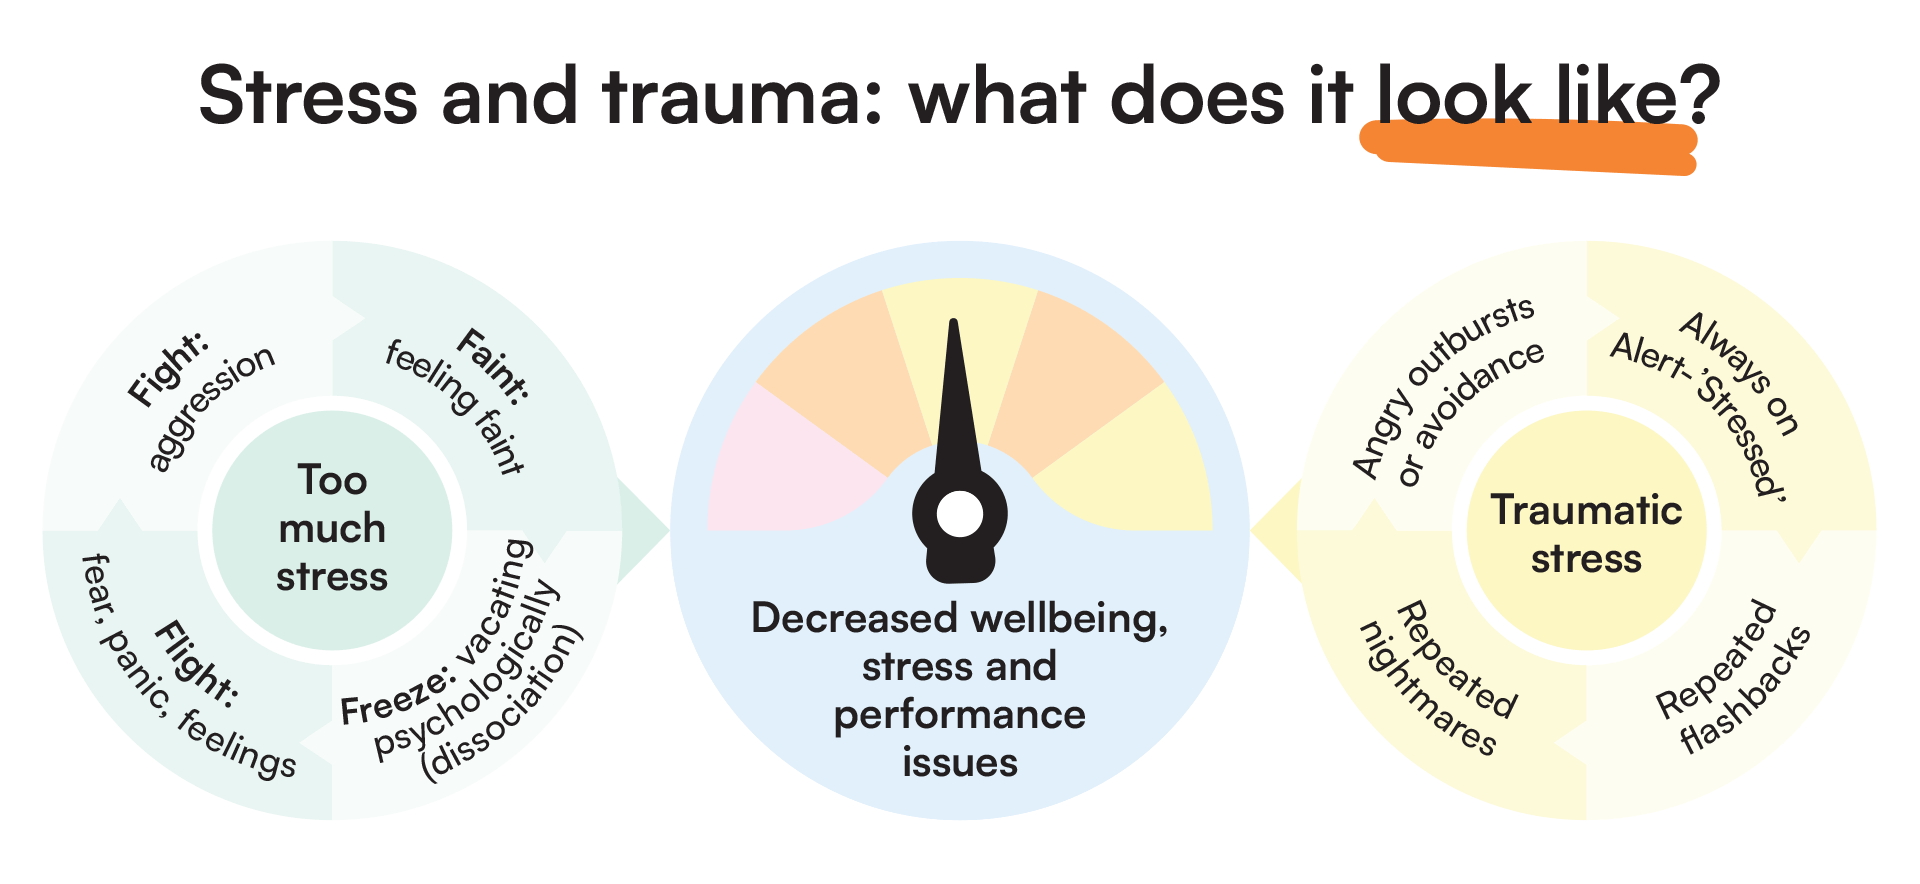 Stress and trauma: what does it look like?